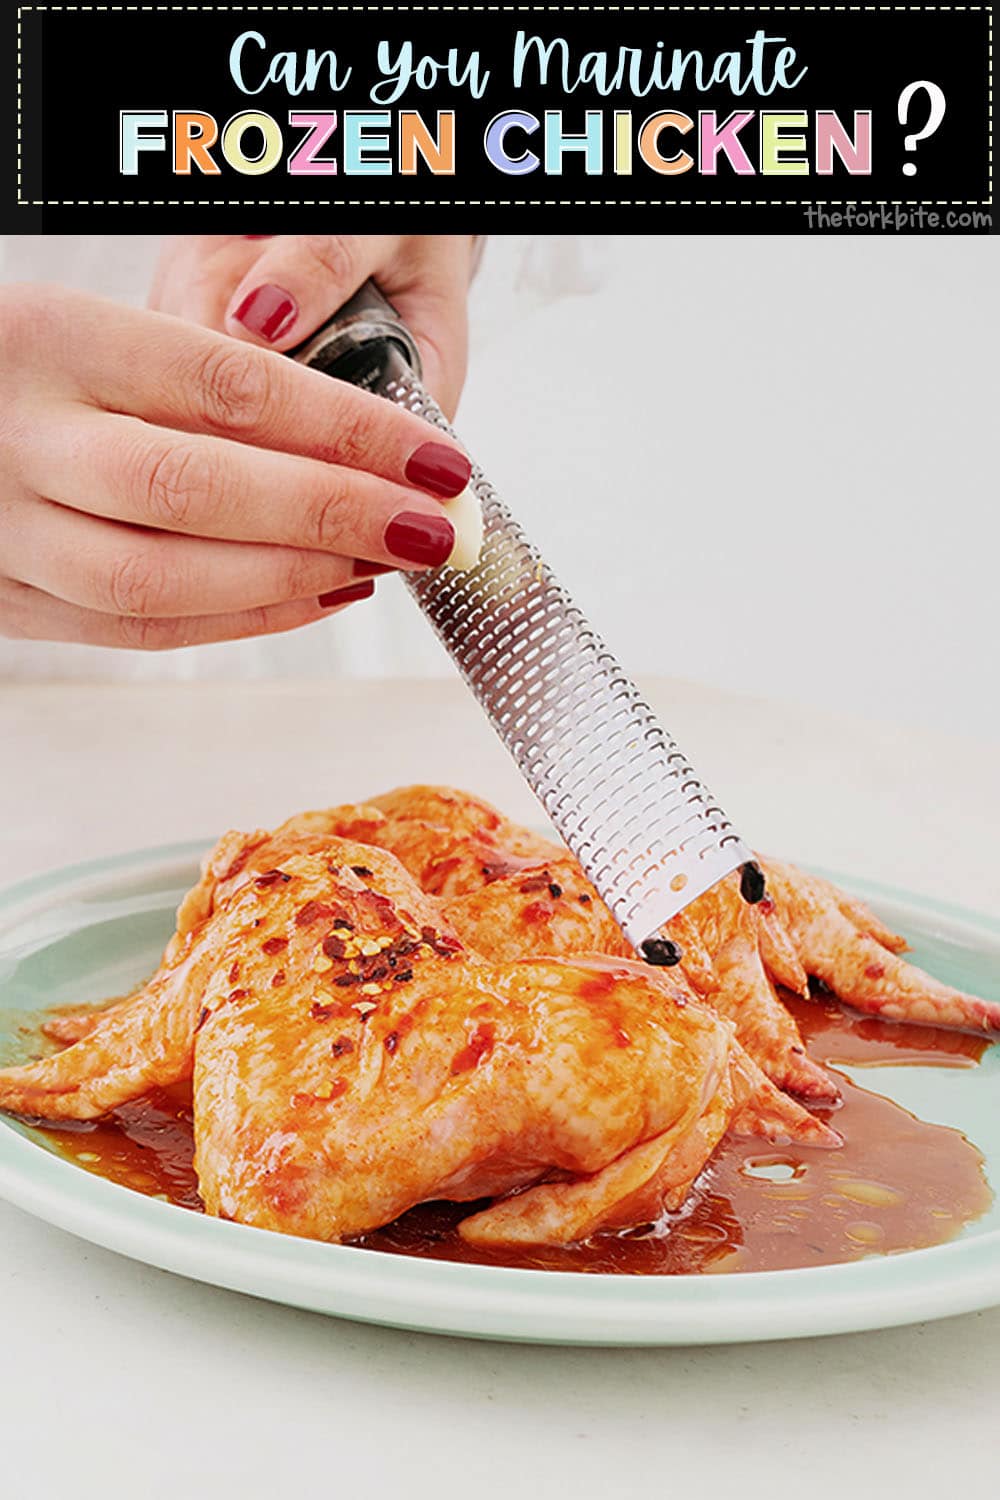 You should defrost frozen chicken overnight in your fridge. The marinade will get washed off as the ice crystals melt, but it will still impart some flavor.